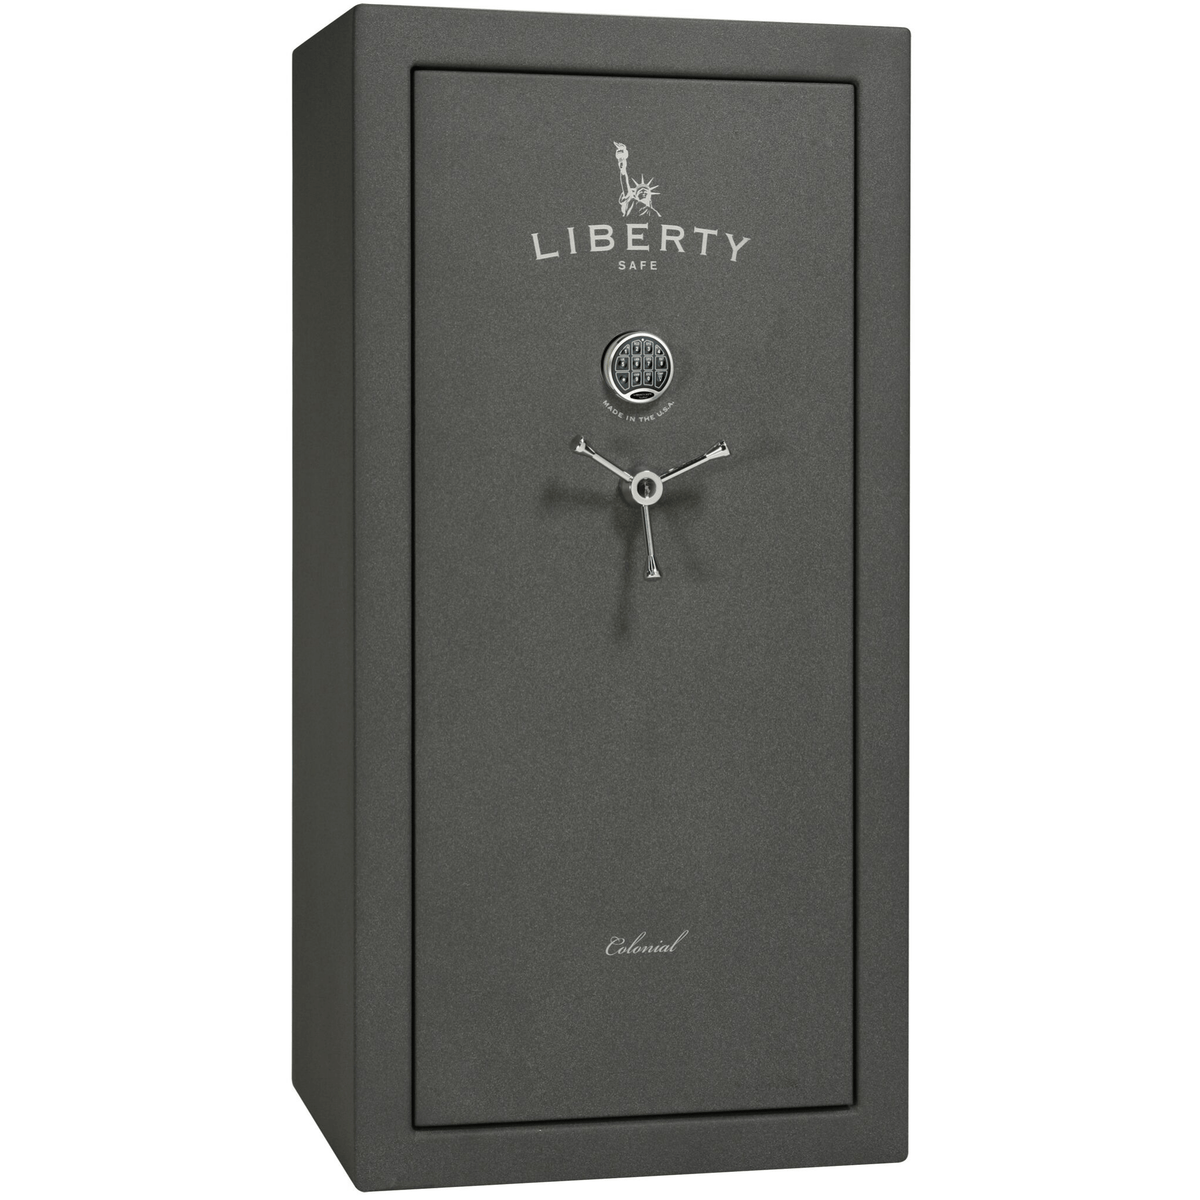 Liberty Colonial 23 Safe in Textured Granite with Chrome Electronic Lock.